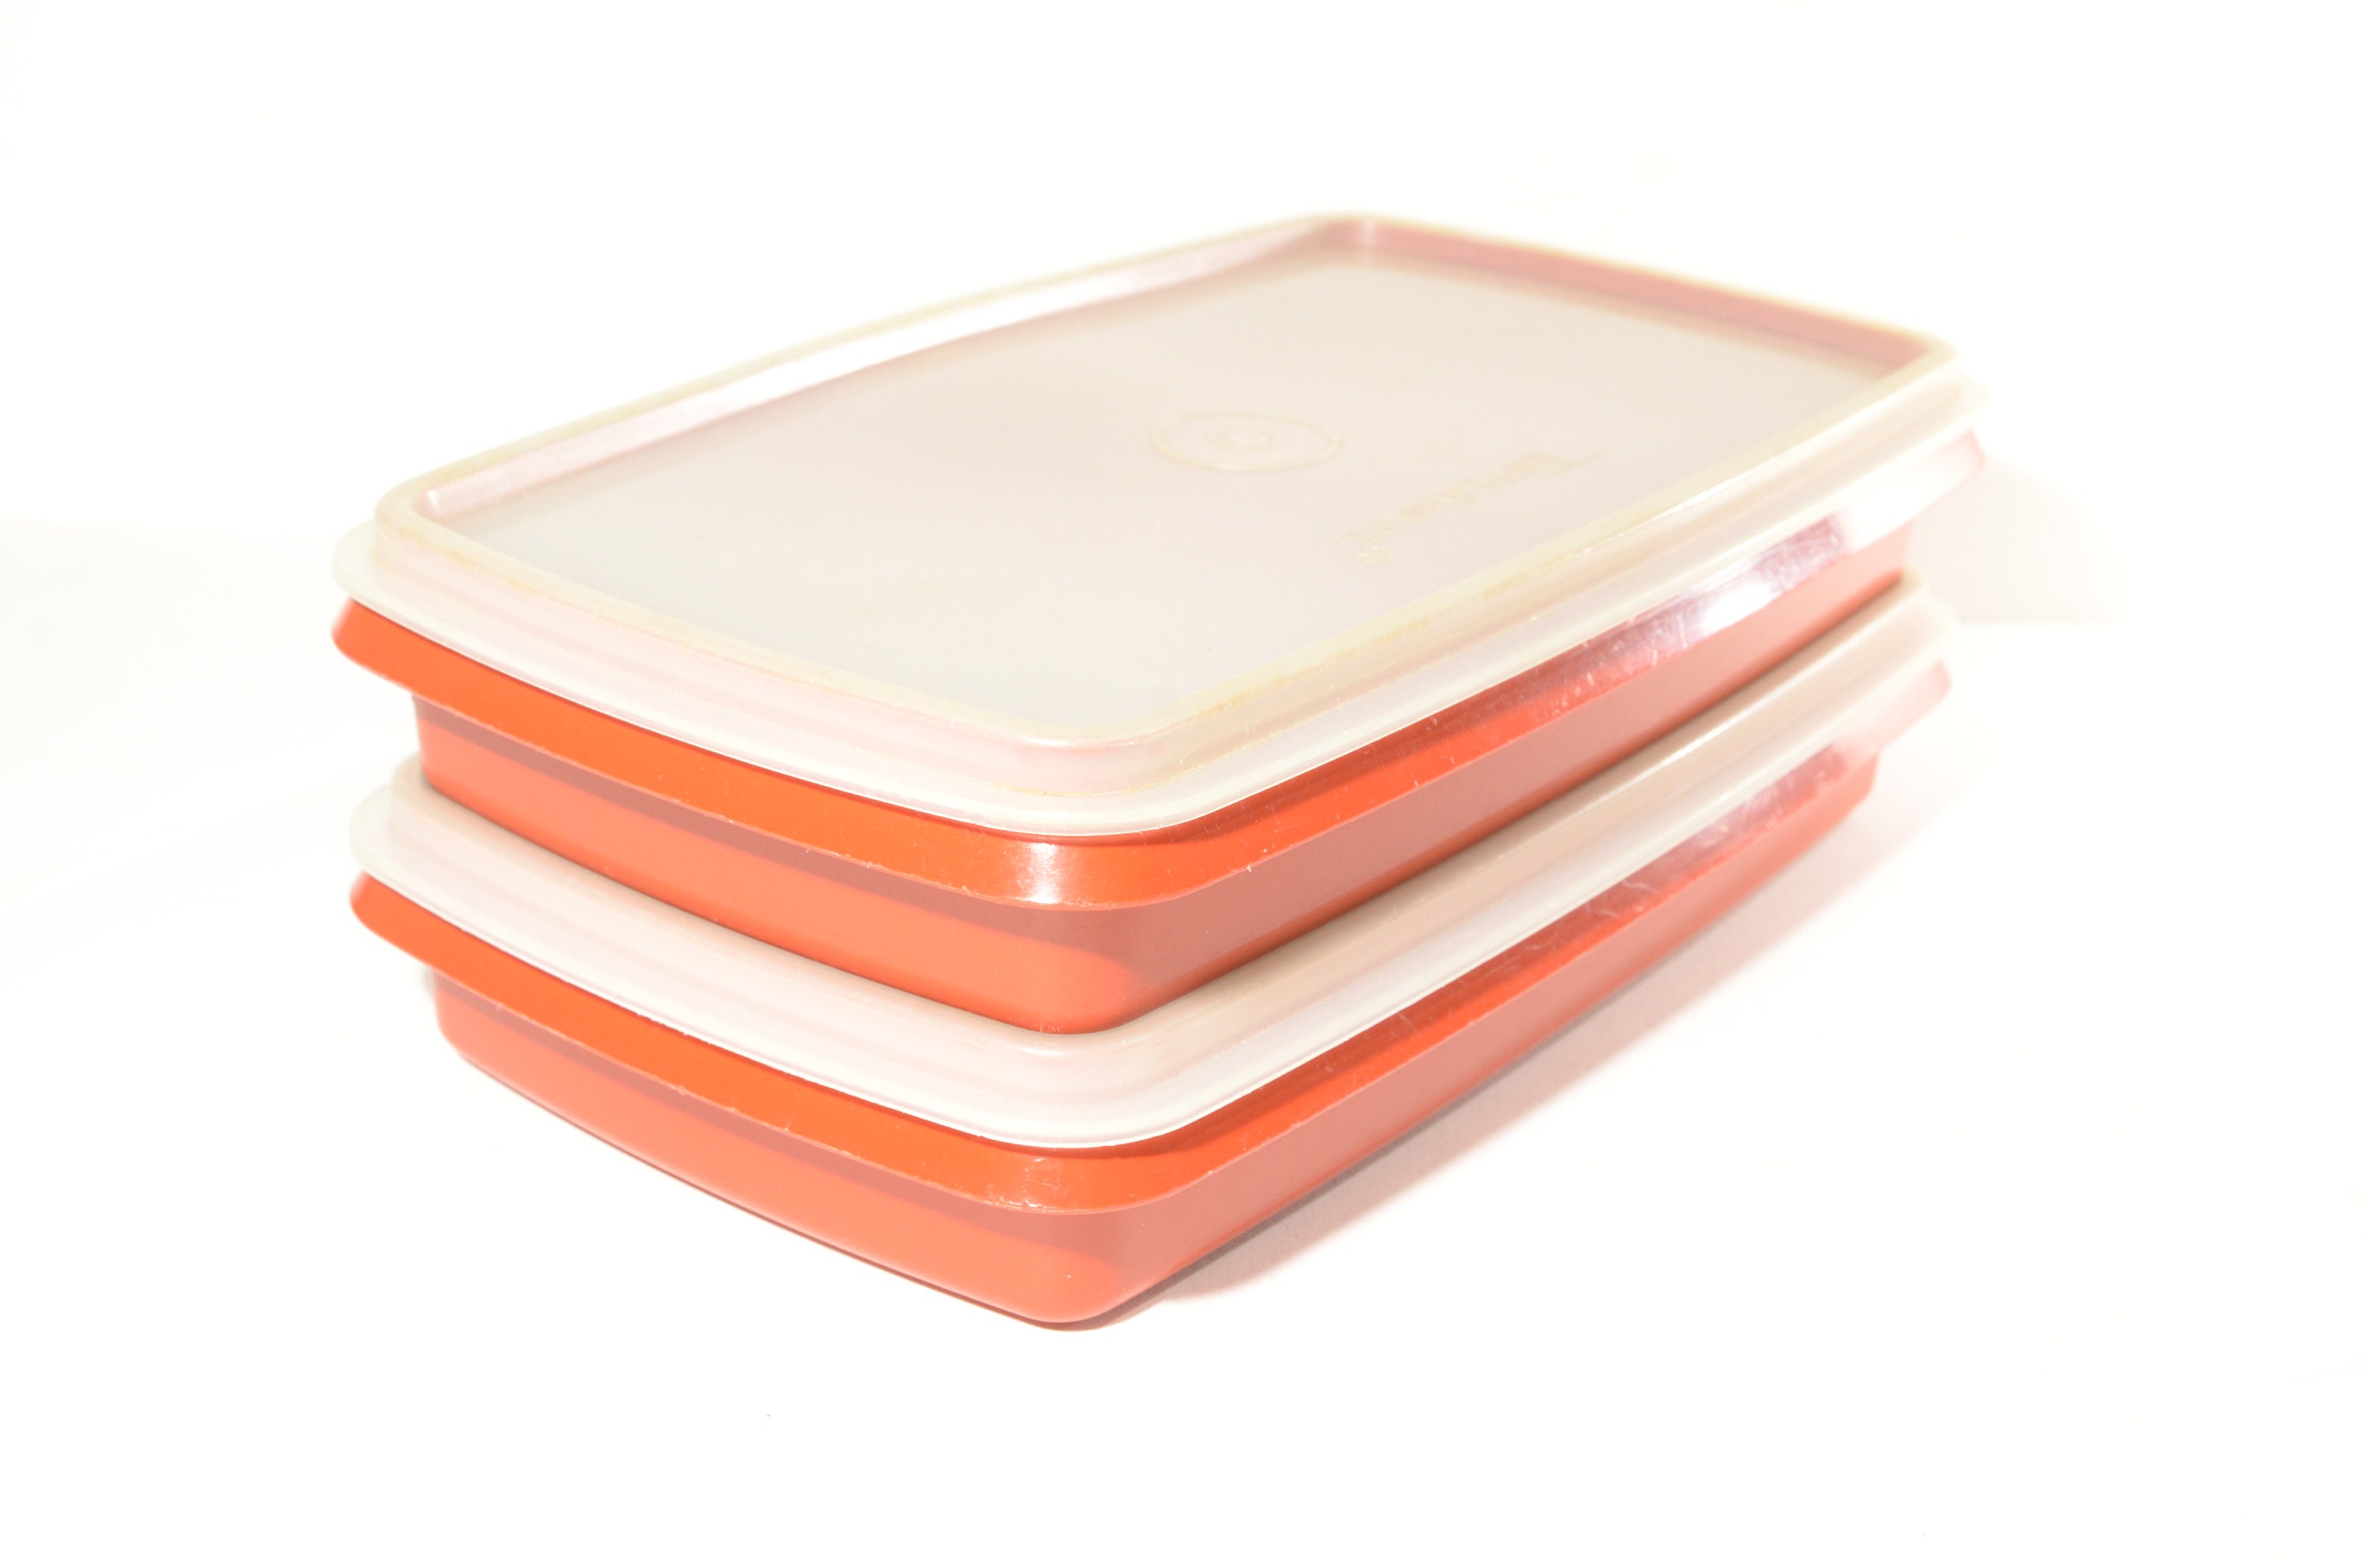 Tupperware, Kitchen, Tupperware Deli Meat Cheese Container Paprika Red